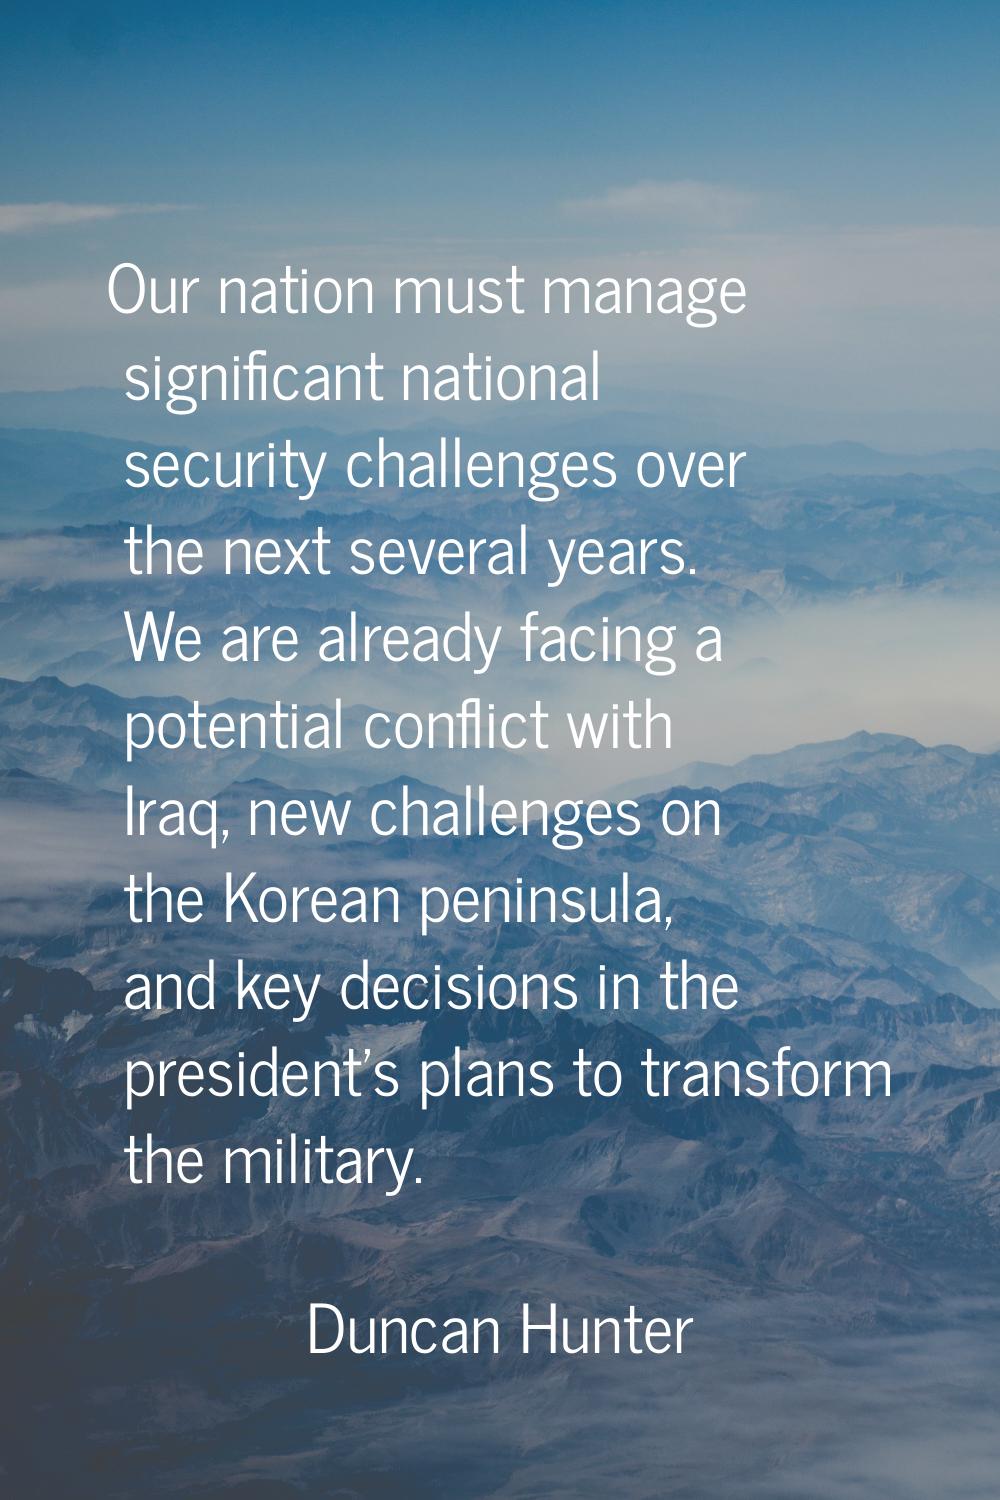 Our nation must manage significant national security challenges over the next several years. We are